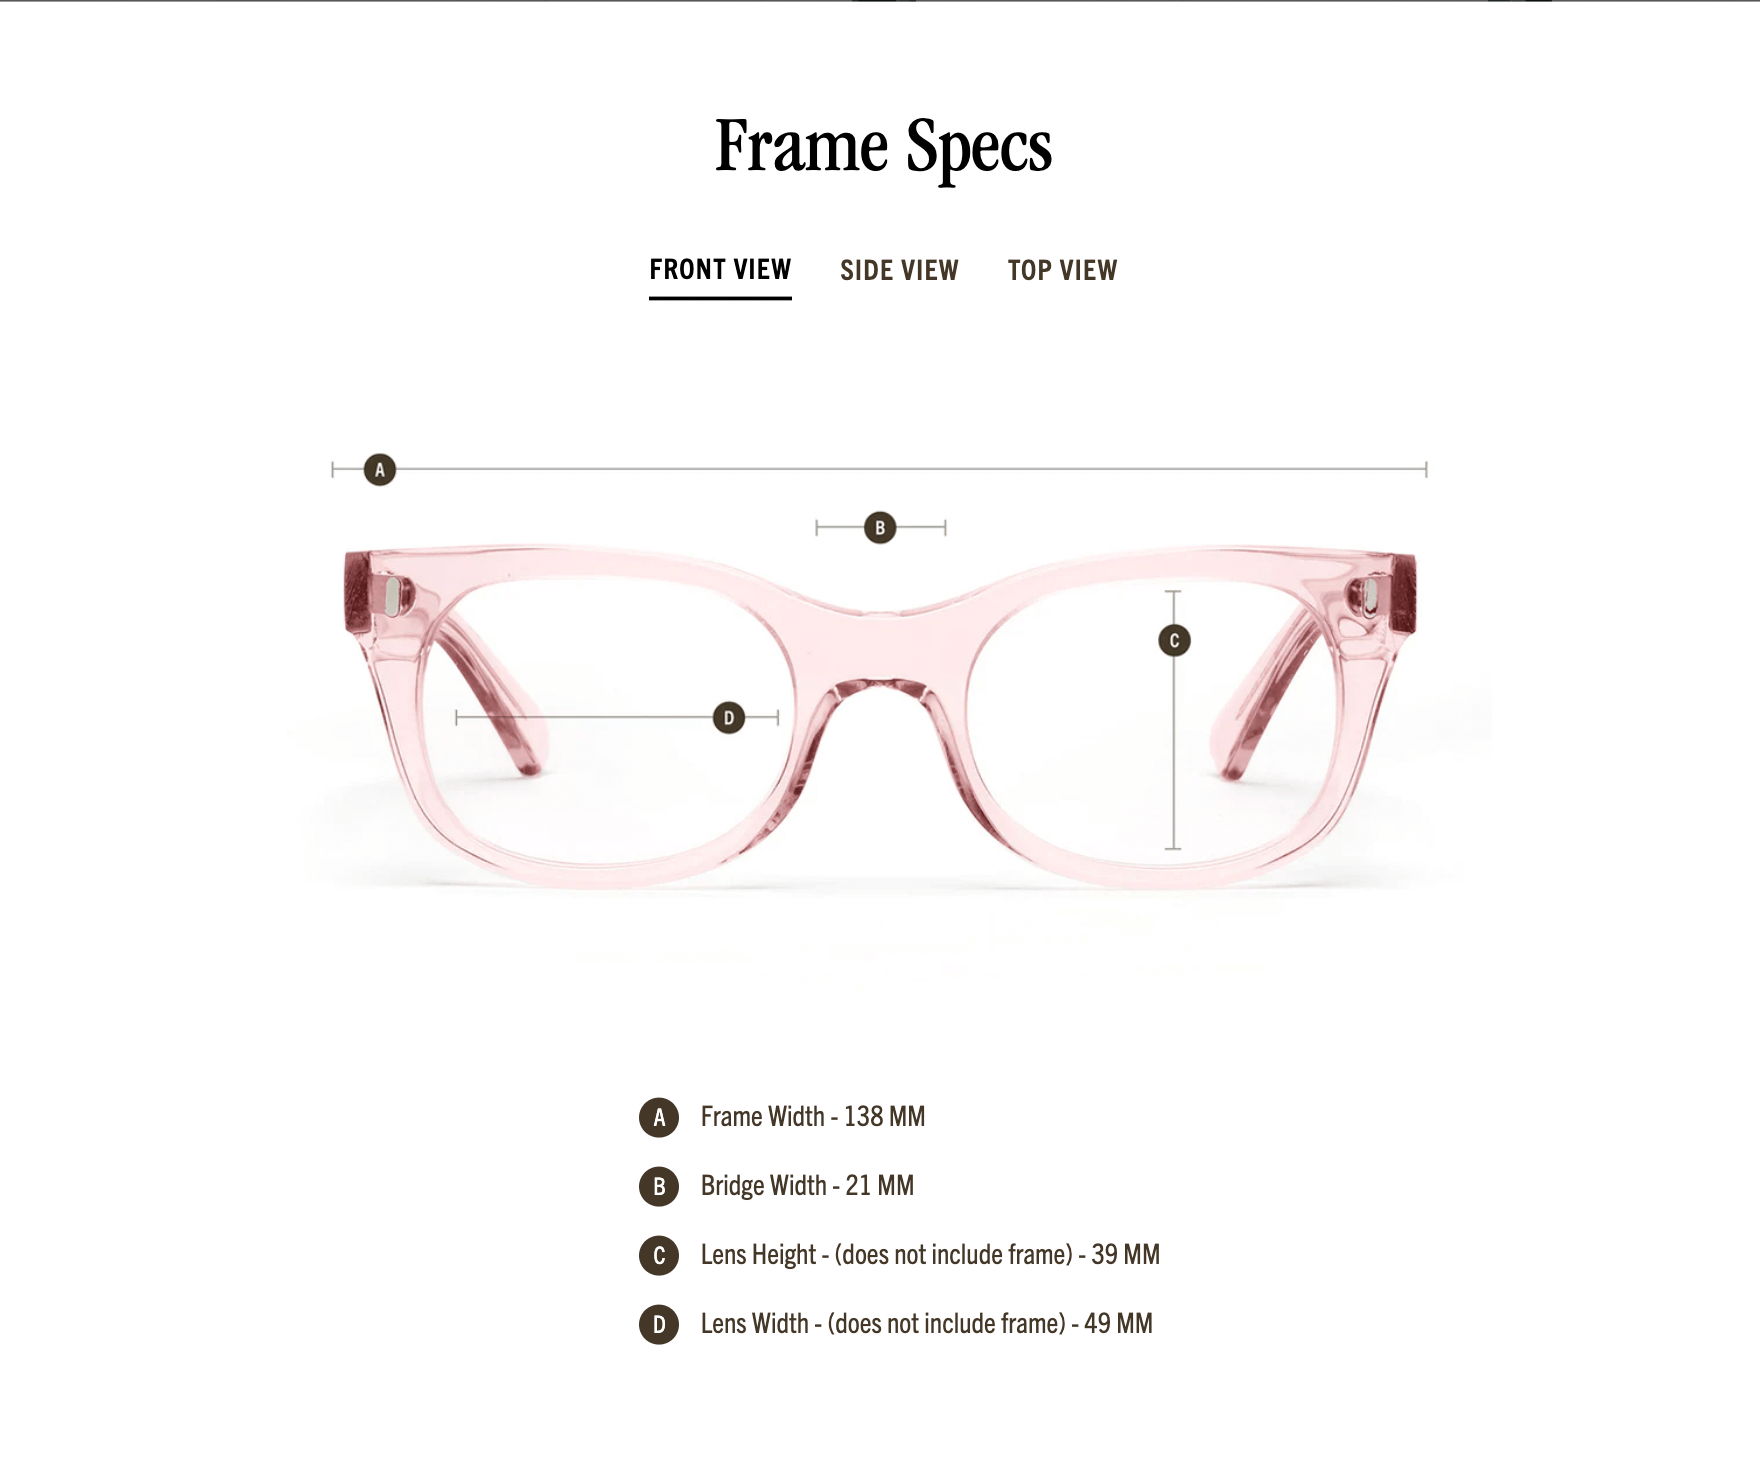 Bixby Reading Glasses - Polished Clear Pink